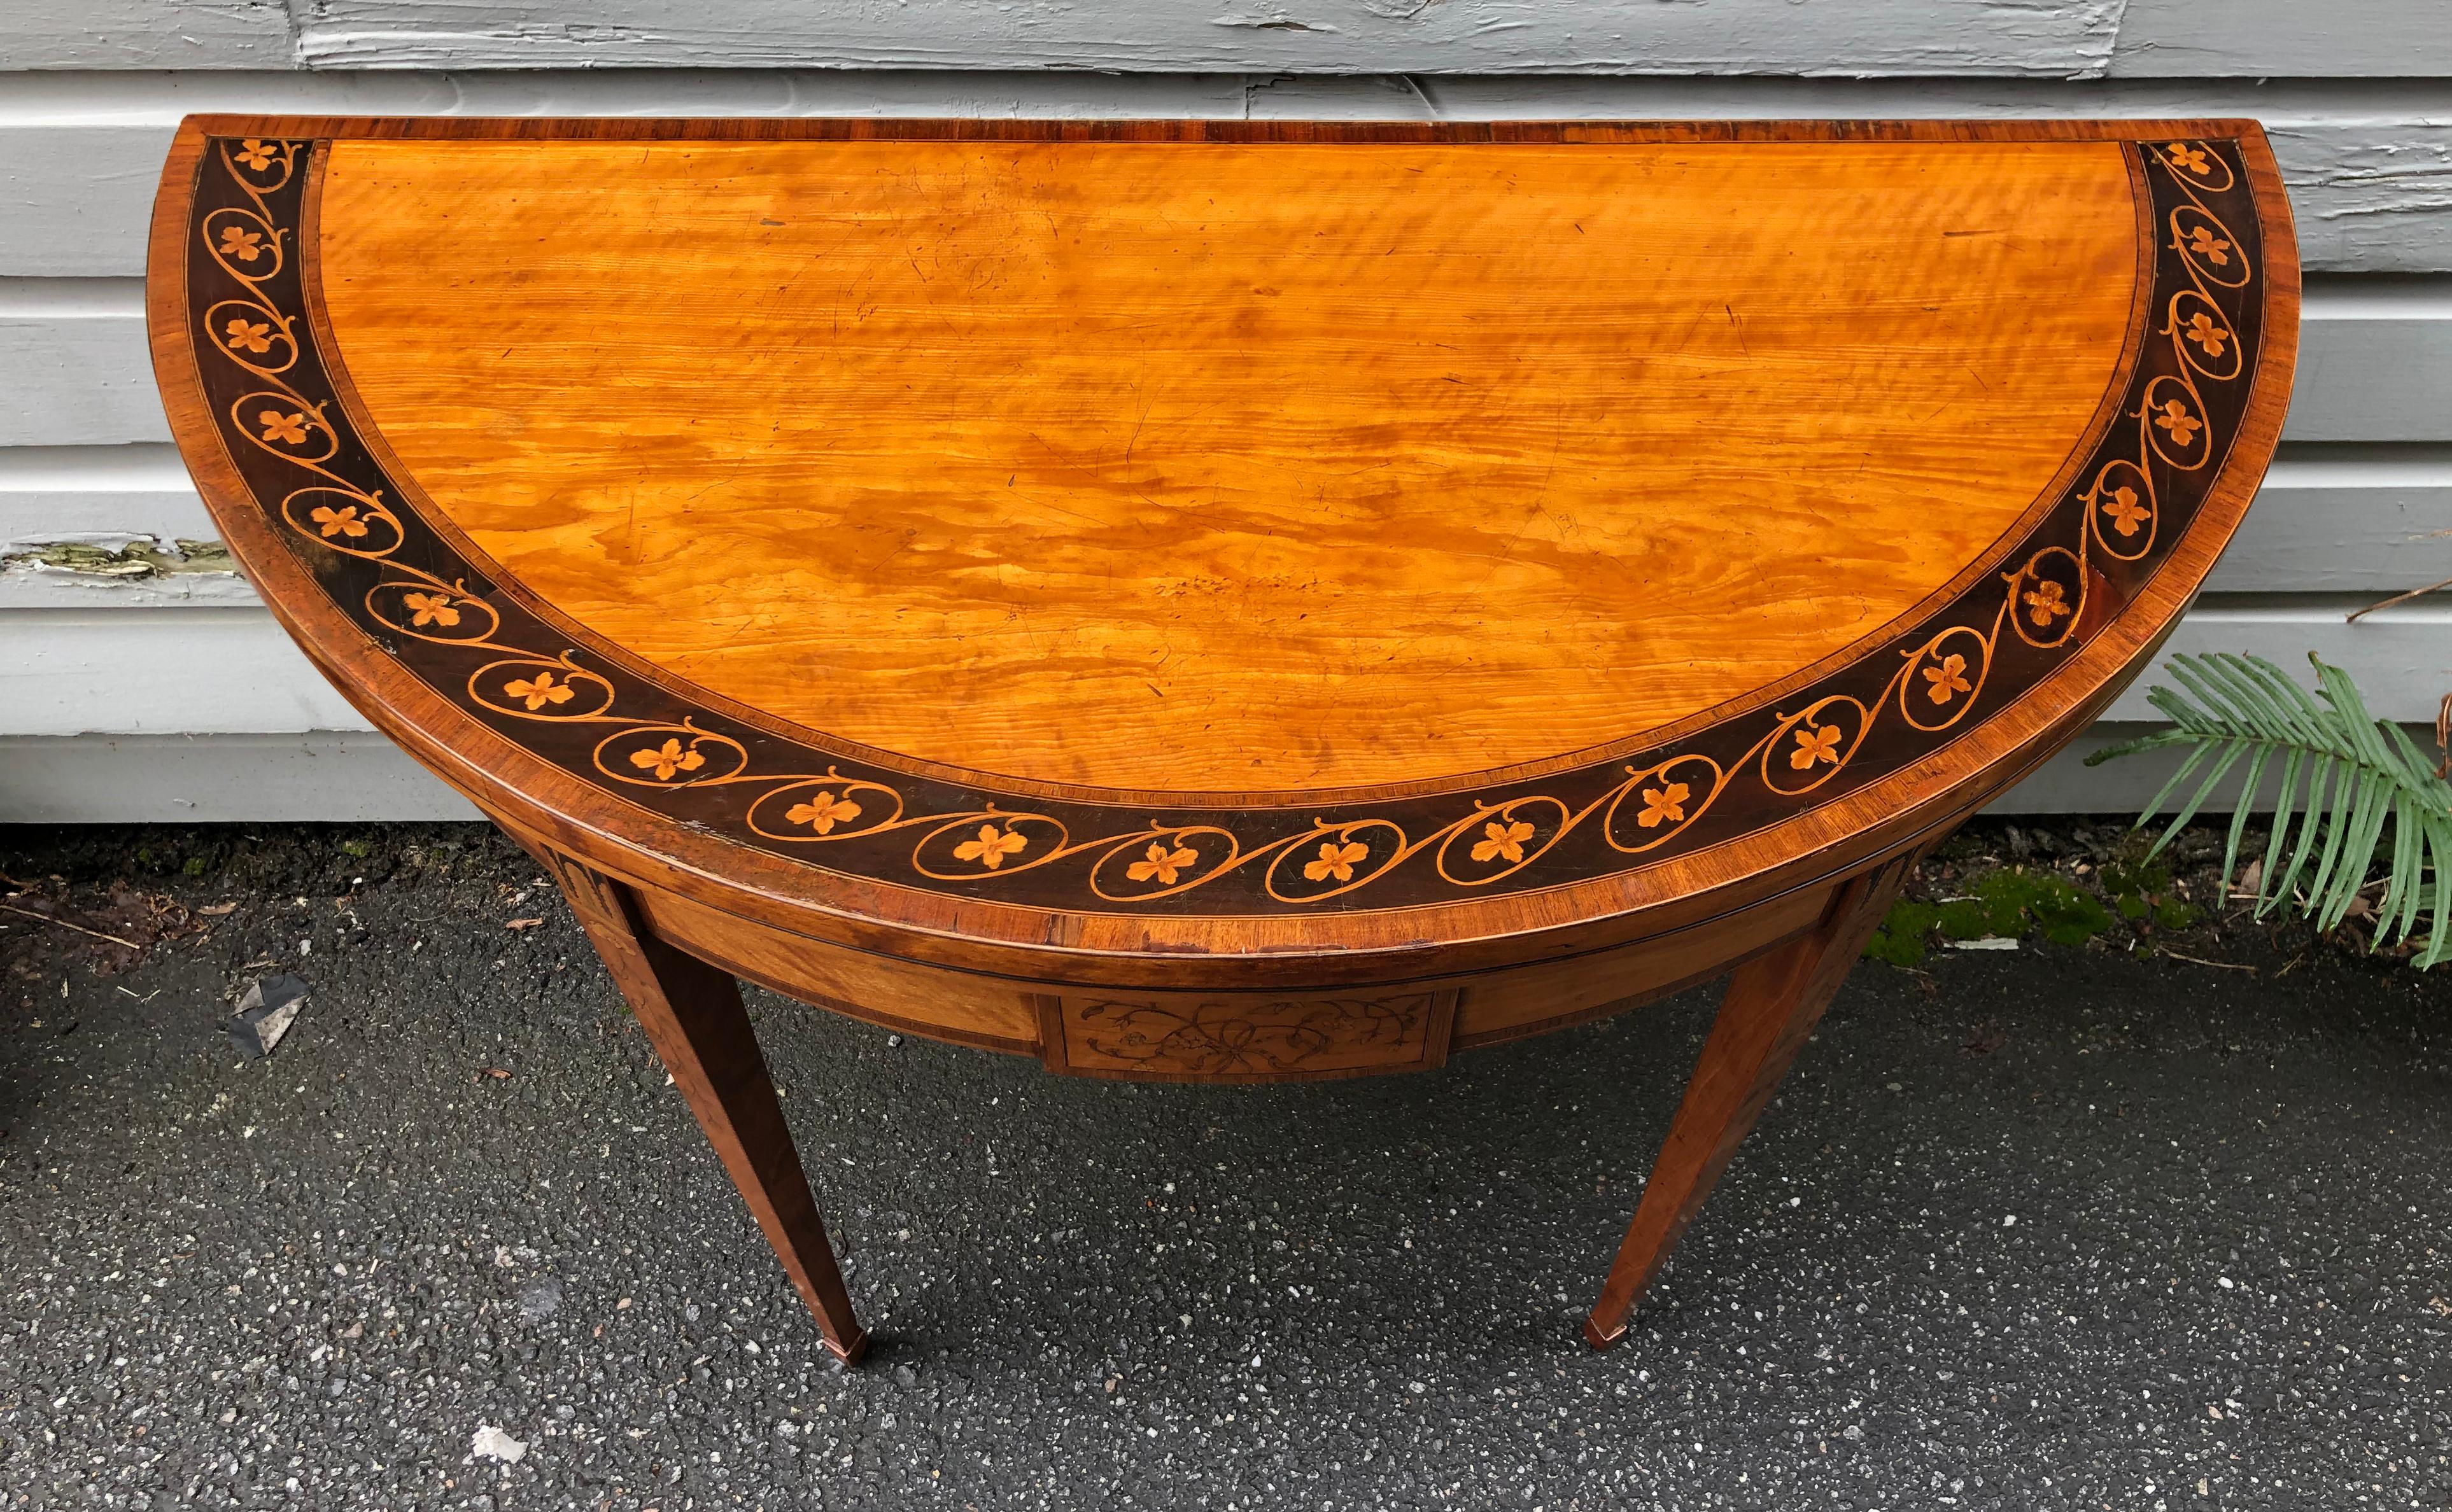 Hepplewhite 18th Century George III Satinwood Game Table with Marquetry Inlay